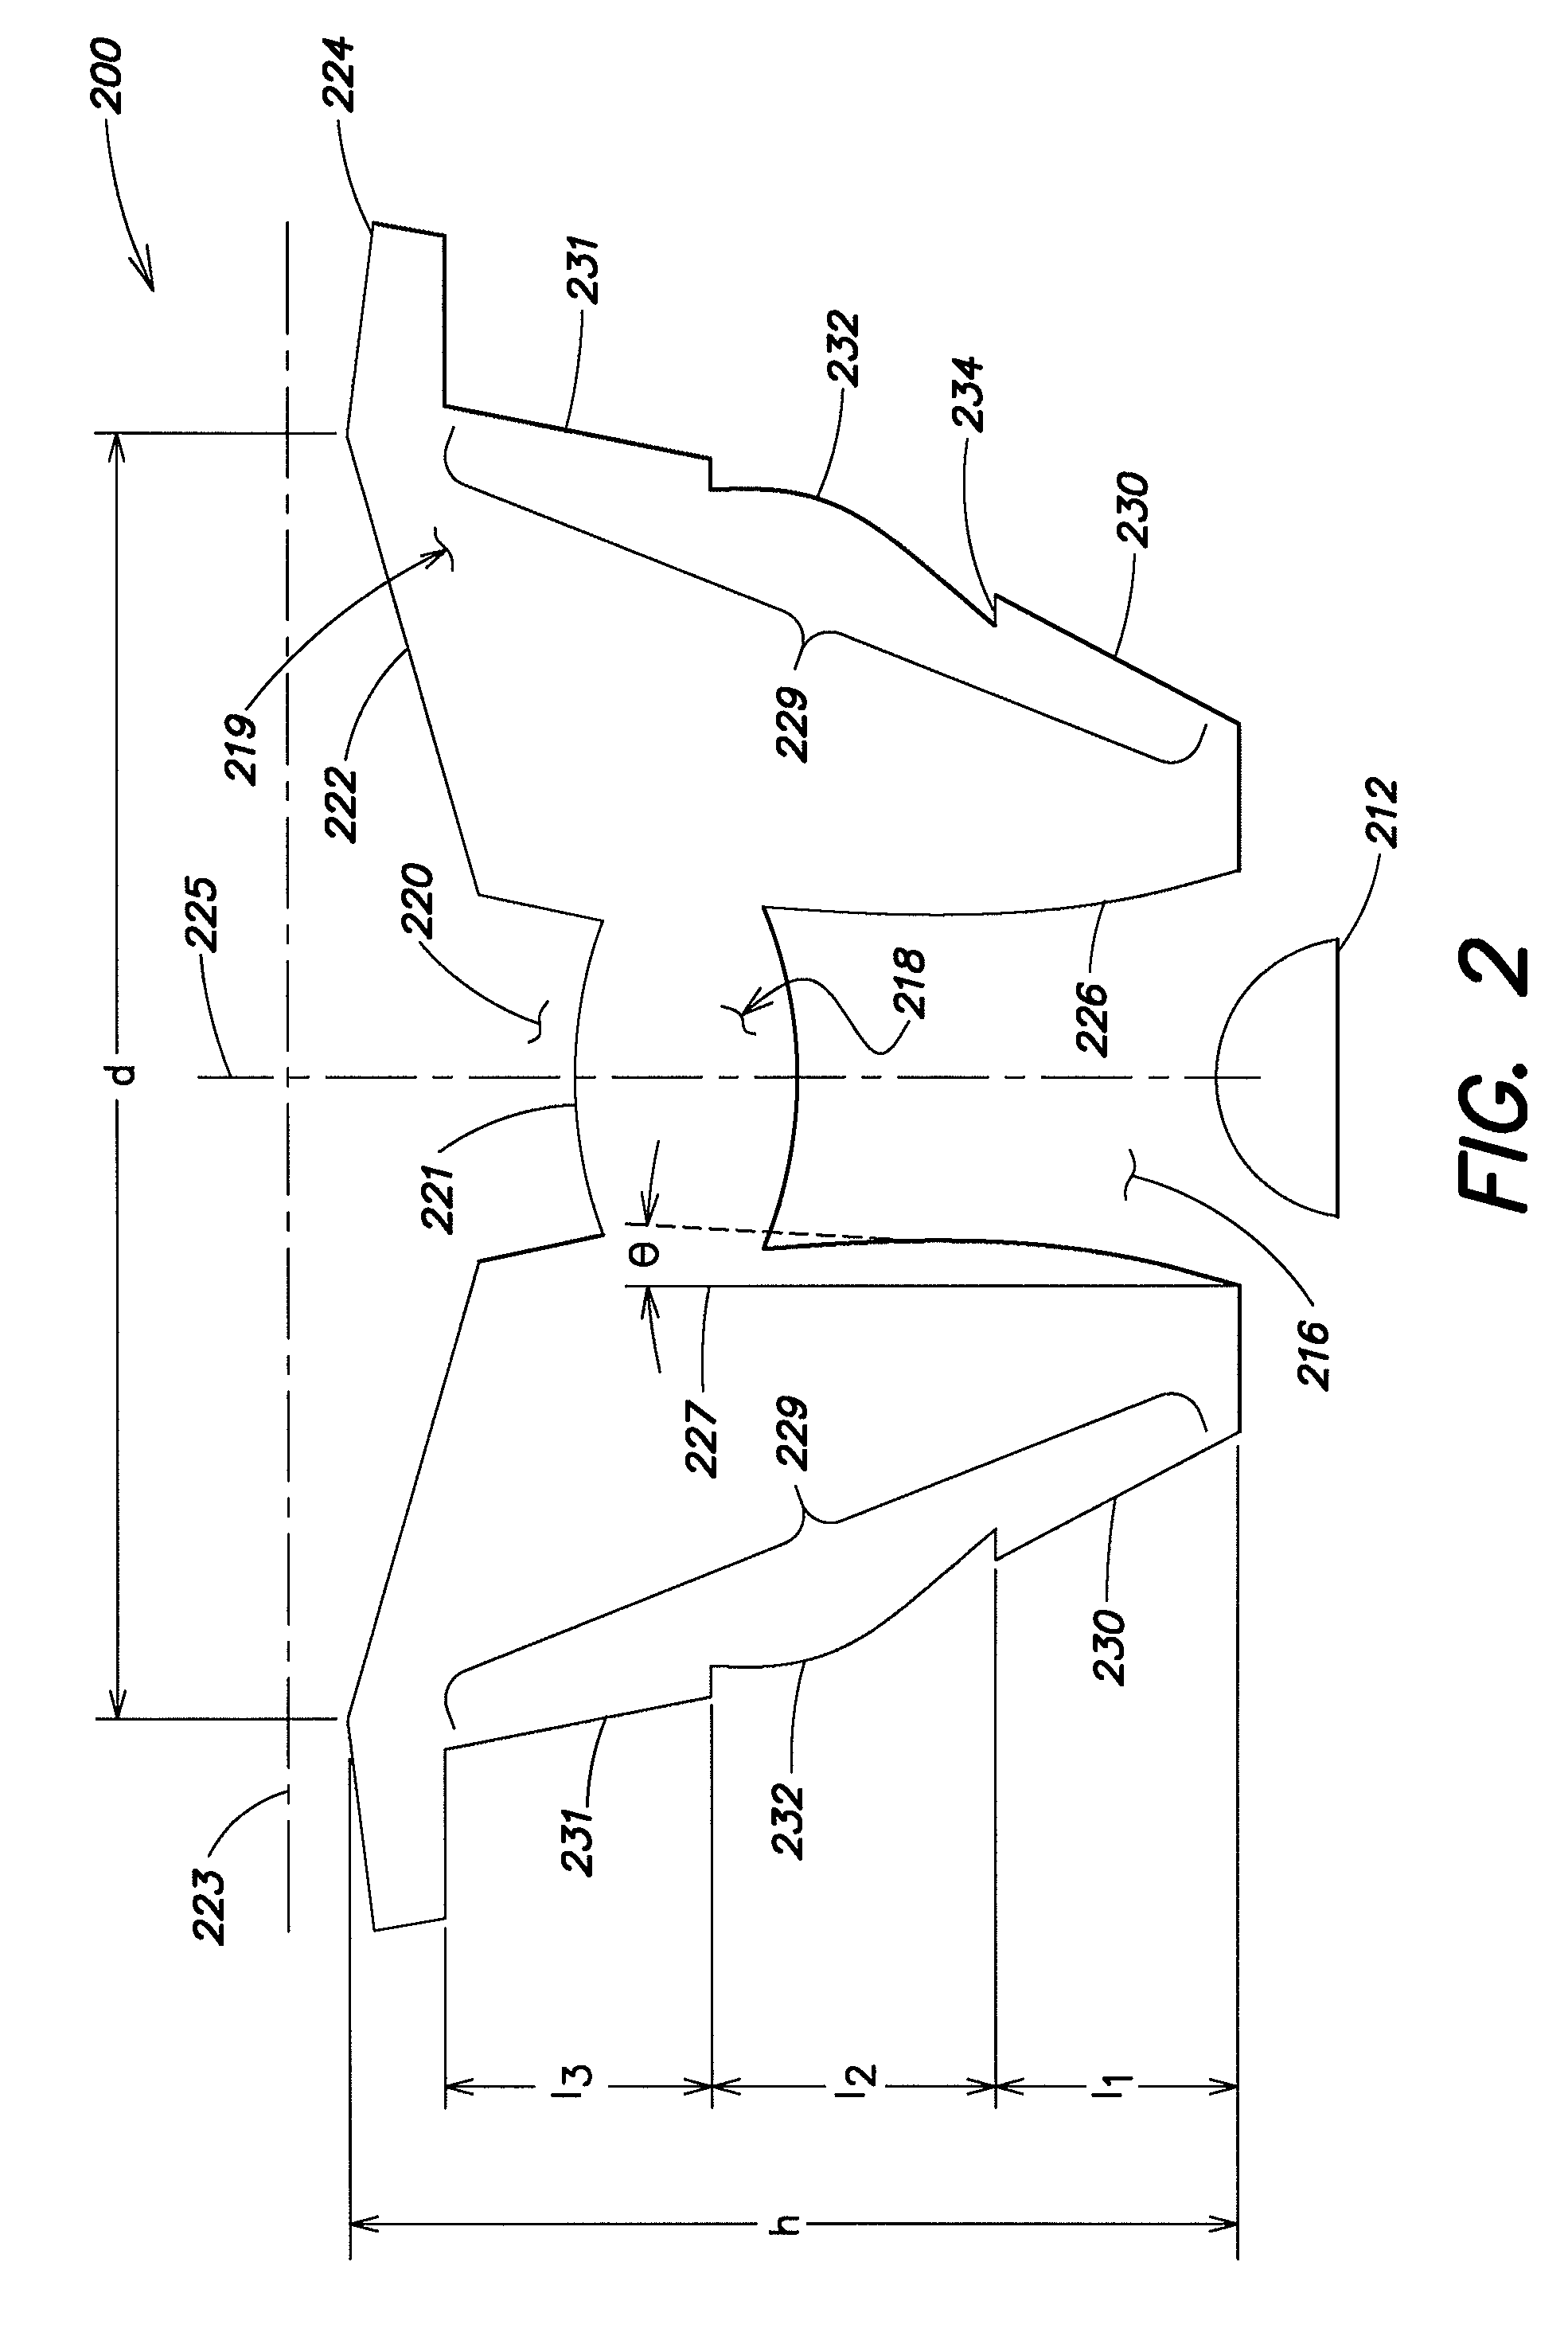 LED collimator having spline surfaces and related methods